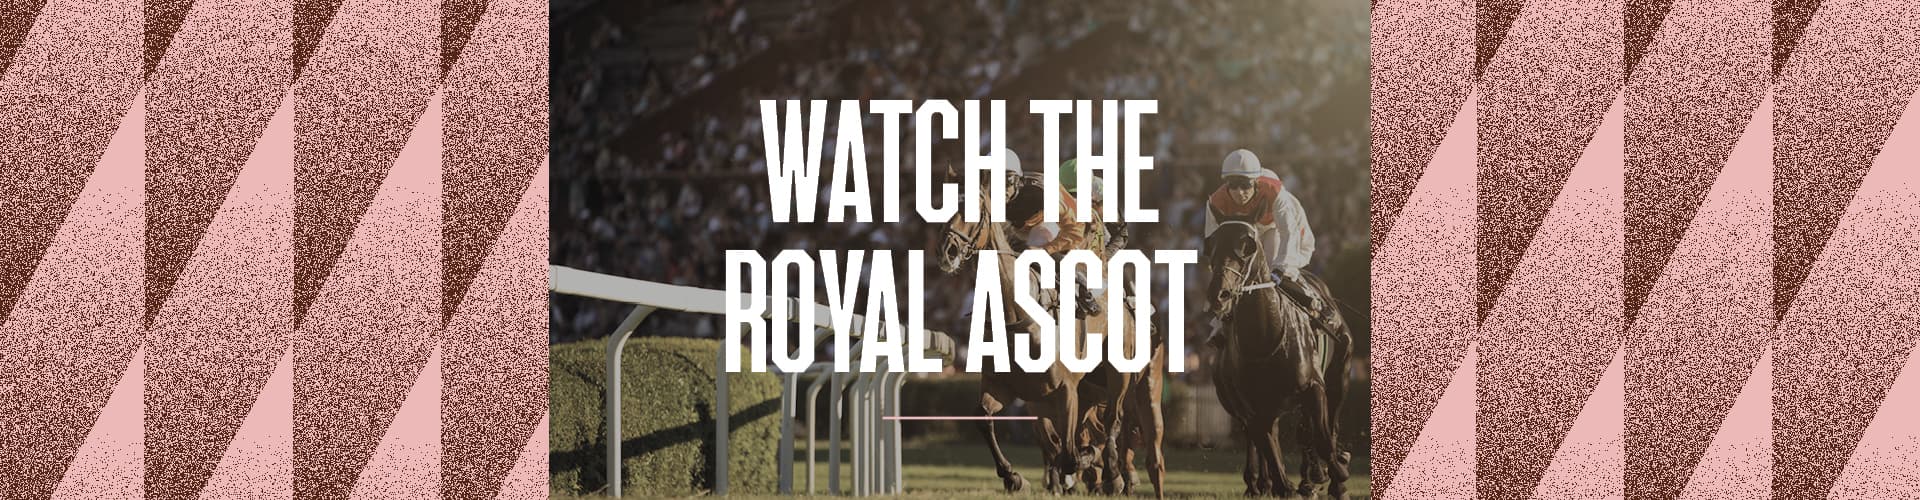 Watch Royal Ascot at Clubhouse 5